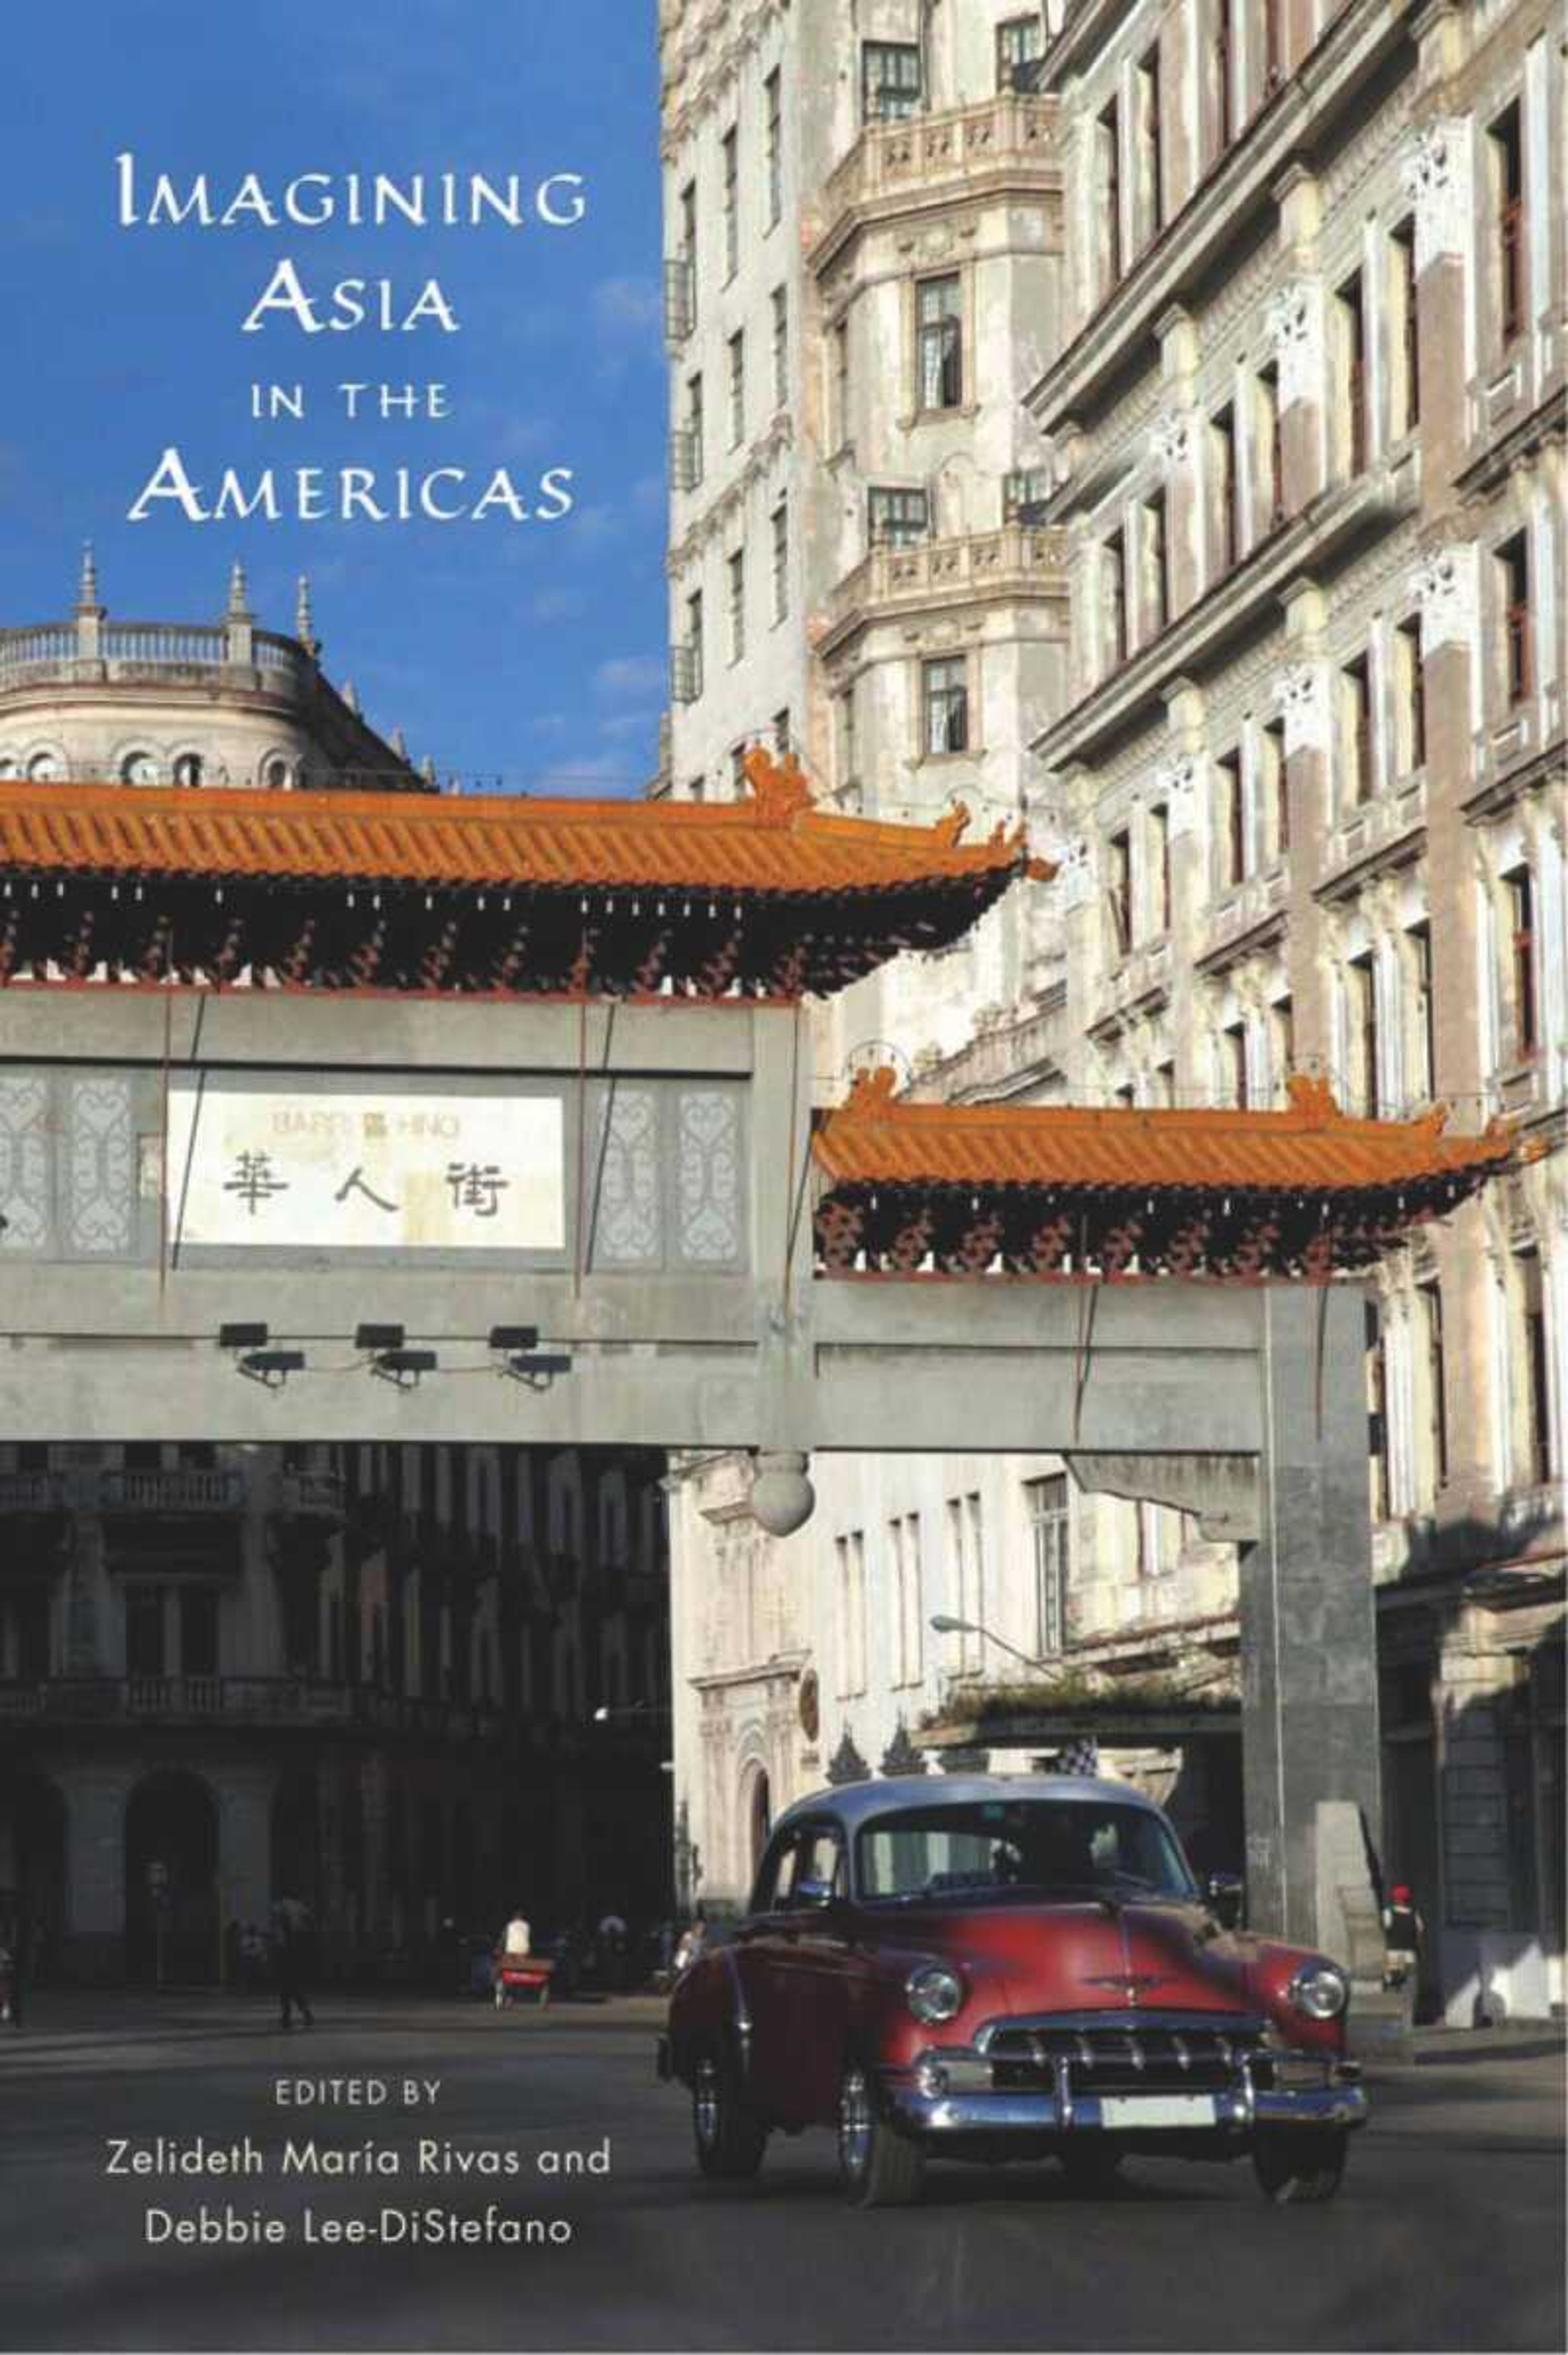 â€śImagining Asia in the Americas,â€ť co-edited by Dr. Zelideth Rivas and Dr. Debra Lee-Distefano, is set to release in September.